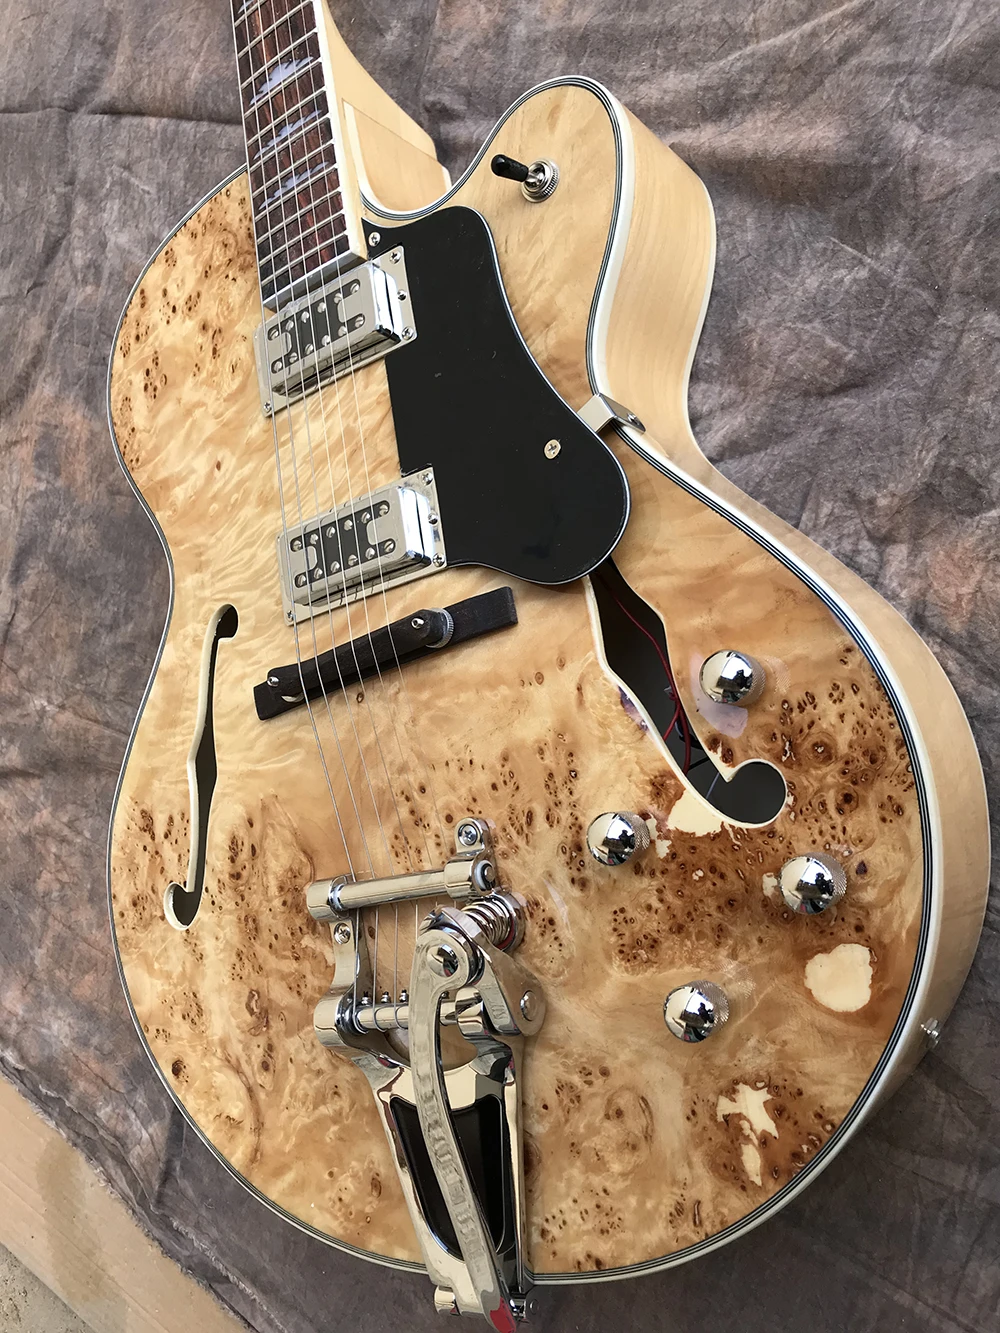 

High Quality Semi hollow F holes Jazz electric guitar, Mahogany guitar body,Quilted maple wood veneer,Bigsby Bridge